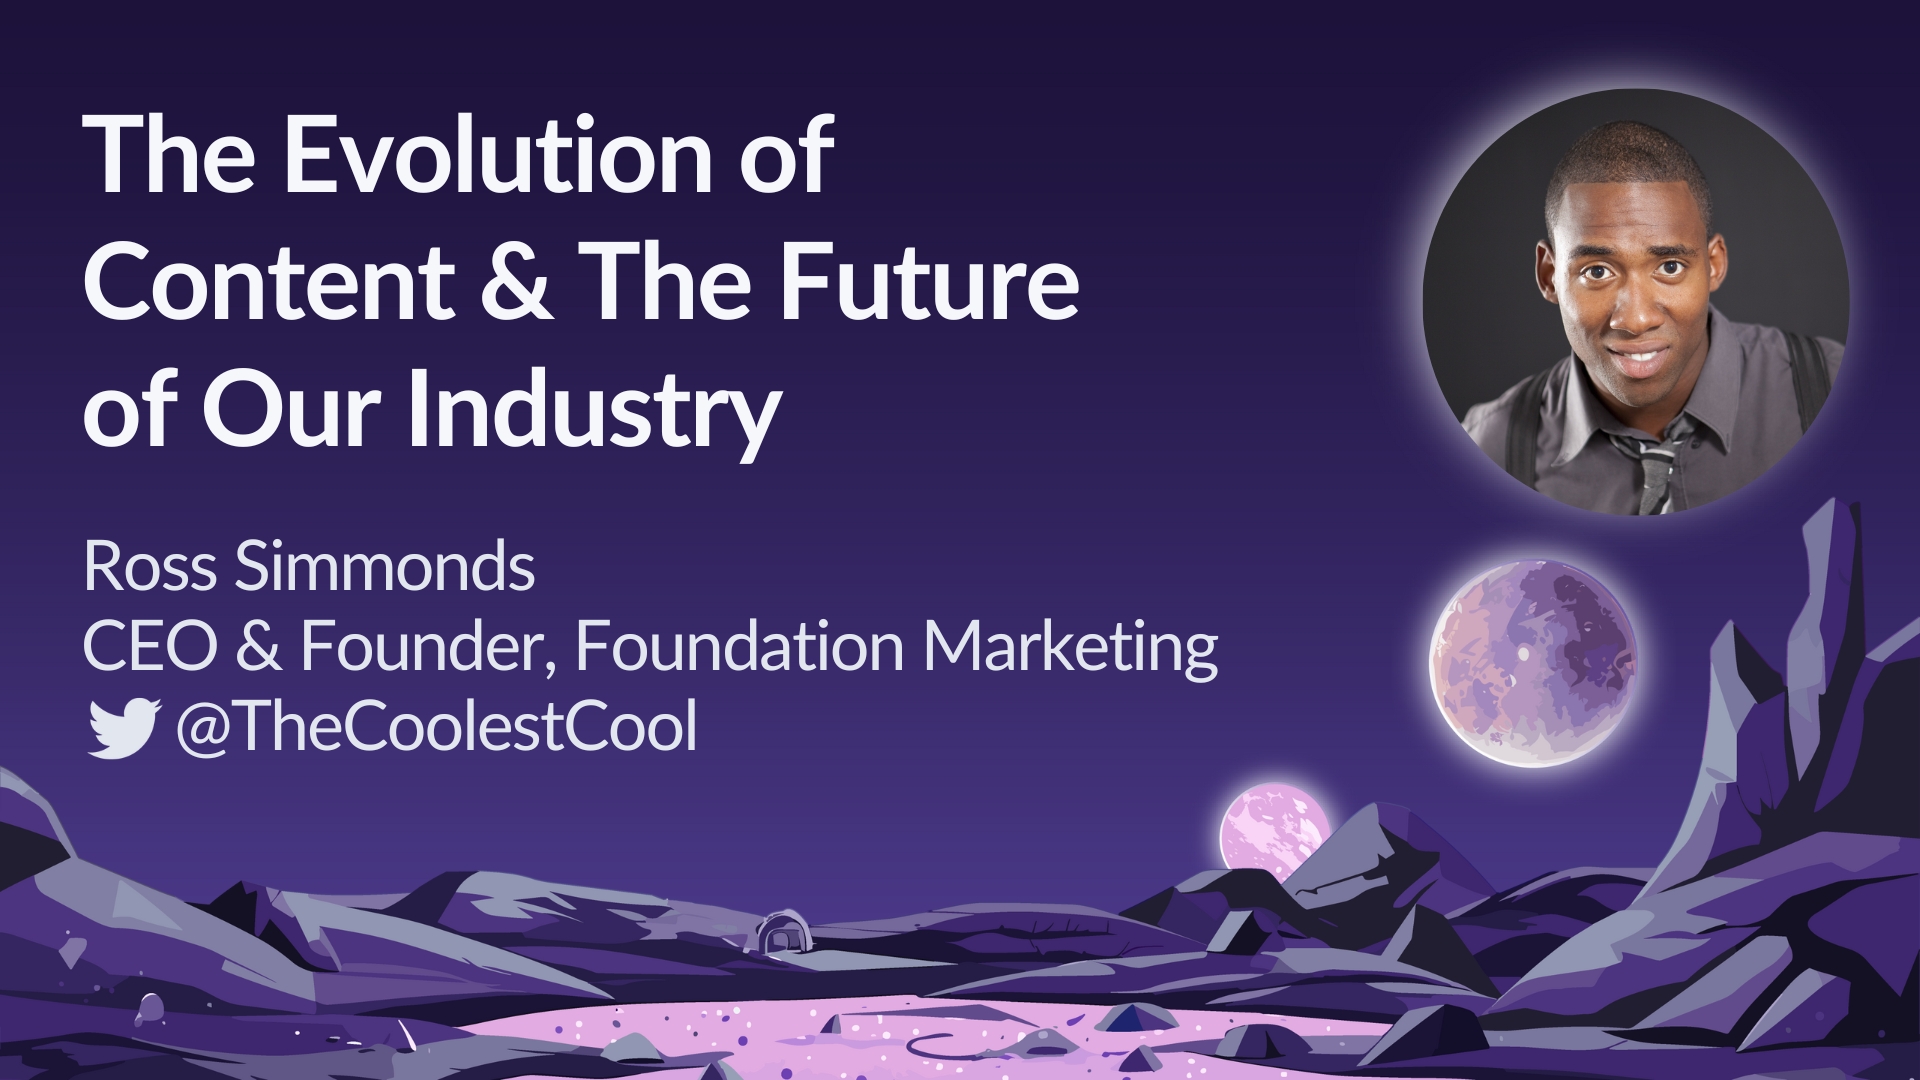 The Evolution of Content & The Future of Our Industry